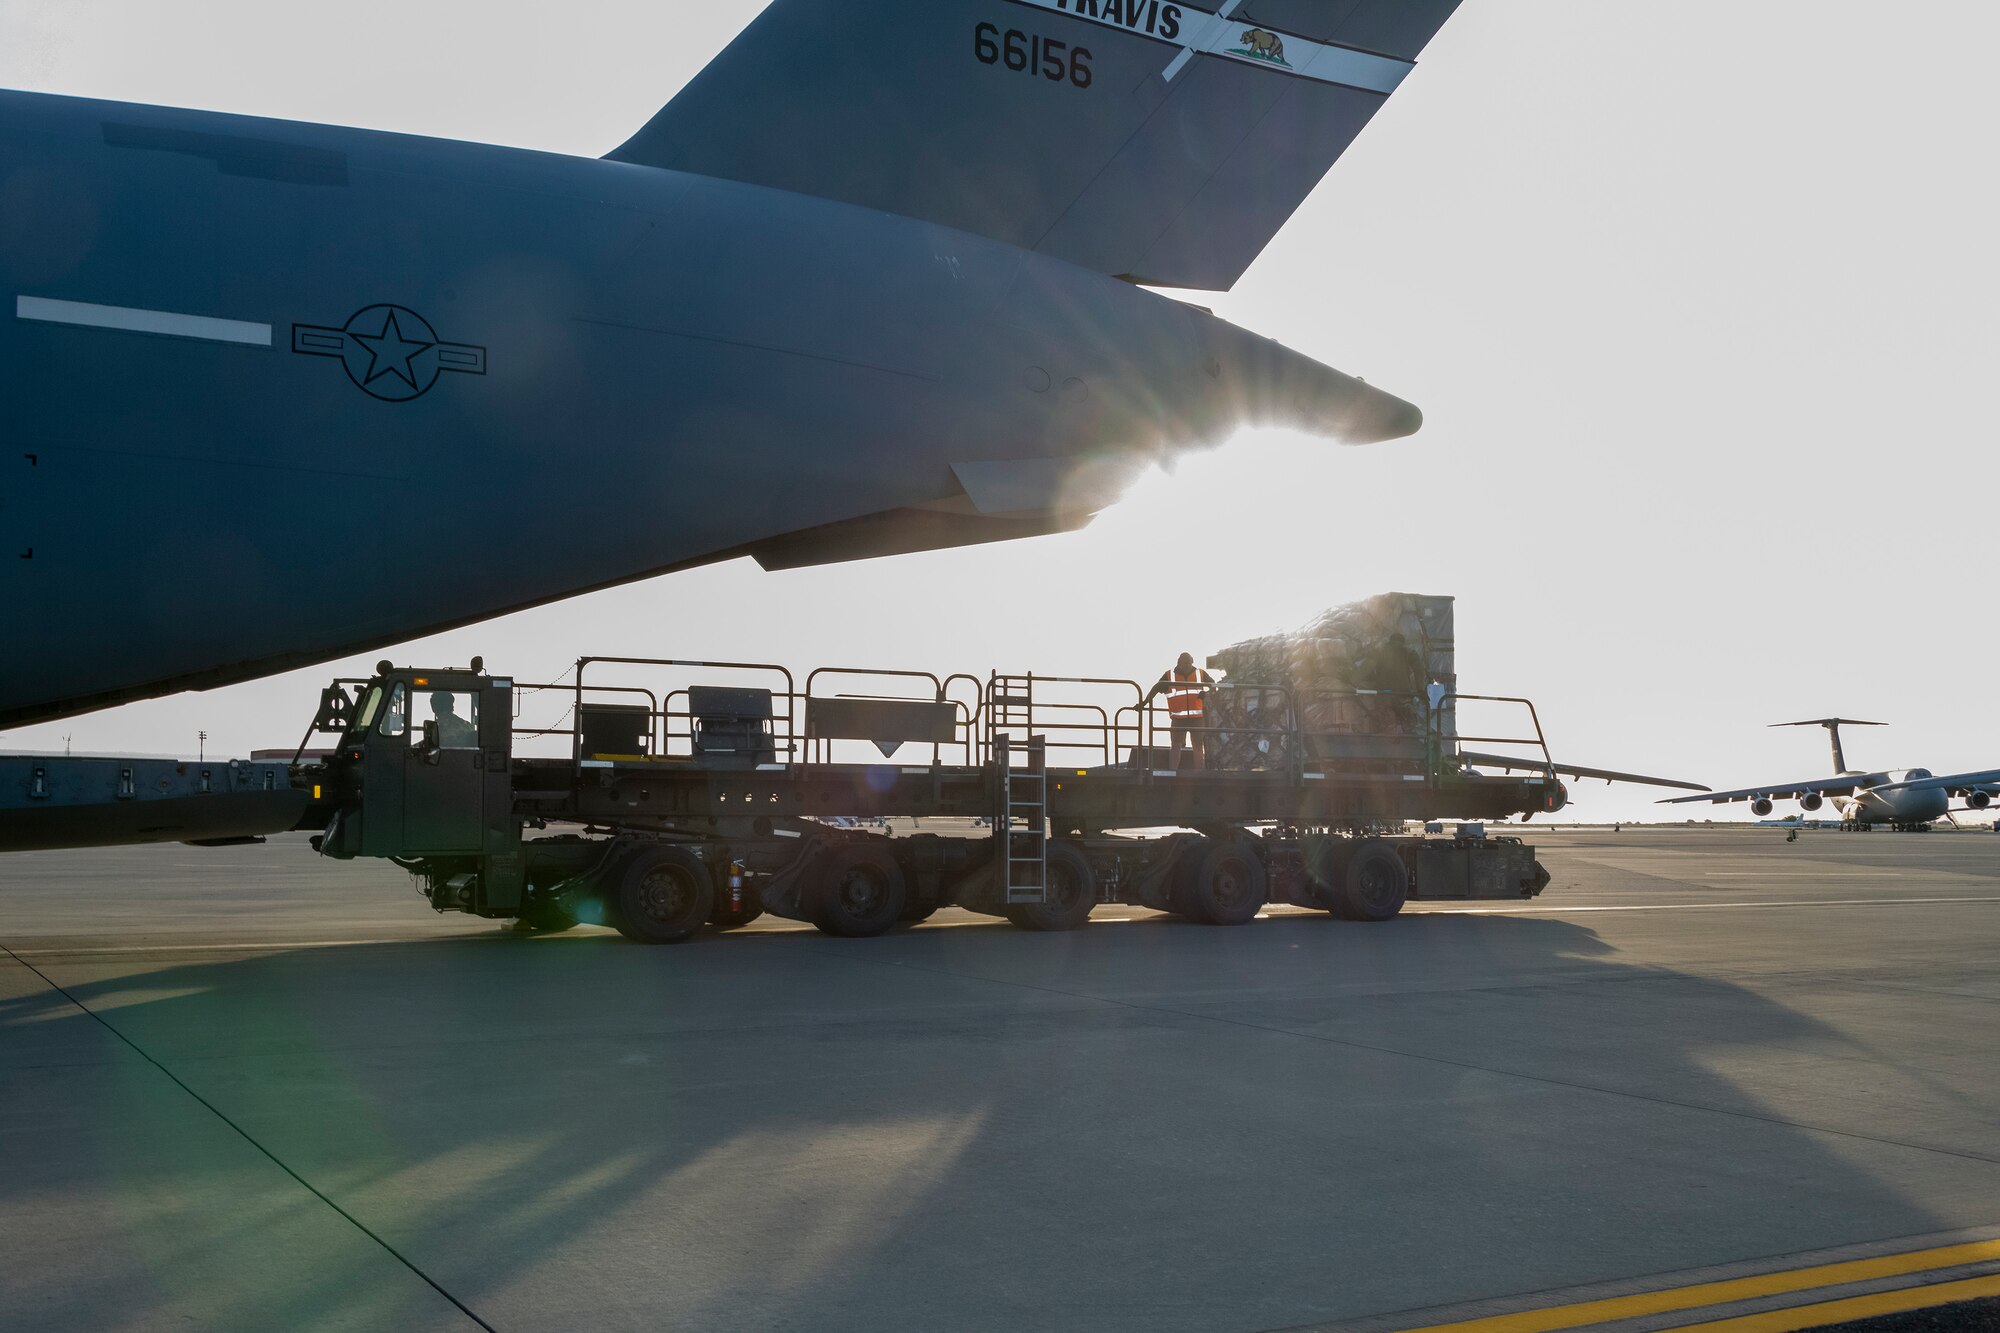 A Tunner 60K aircraft cargo loader delivers cargo to a U.S. Air Force C-17 Globemaster III during readiness exercise Roundel Perun 22-01, Travis Air Force Base, California, April 10, 2022. The base exercise was designed to enhance the capabilities of multiple squadrons in responding to possible real-world scenarios. (U.S. Air Force photo by Heide Couch)